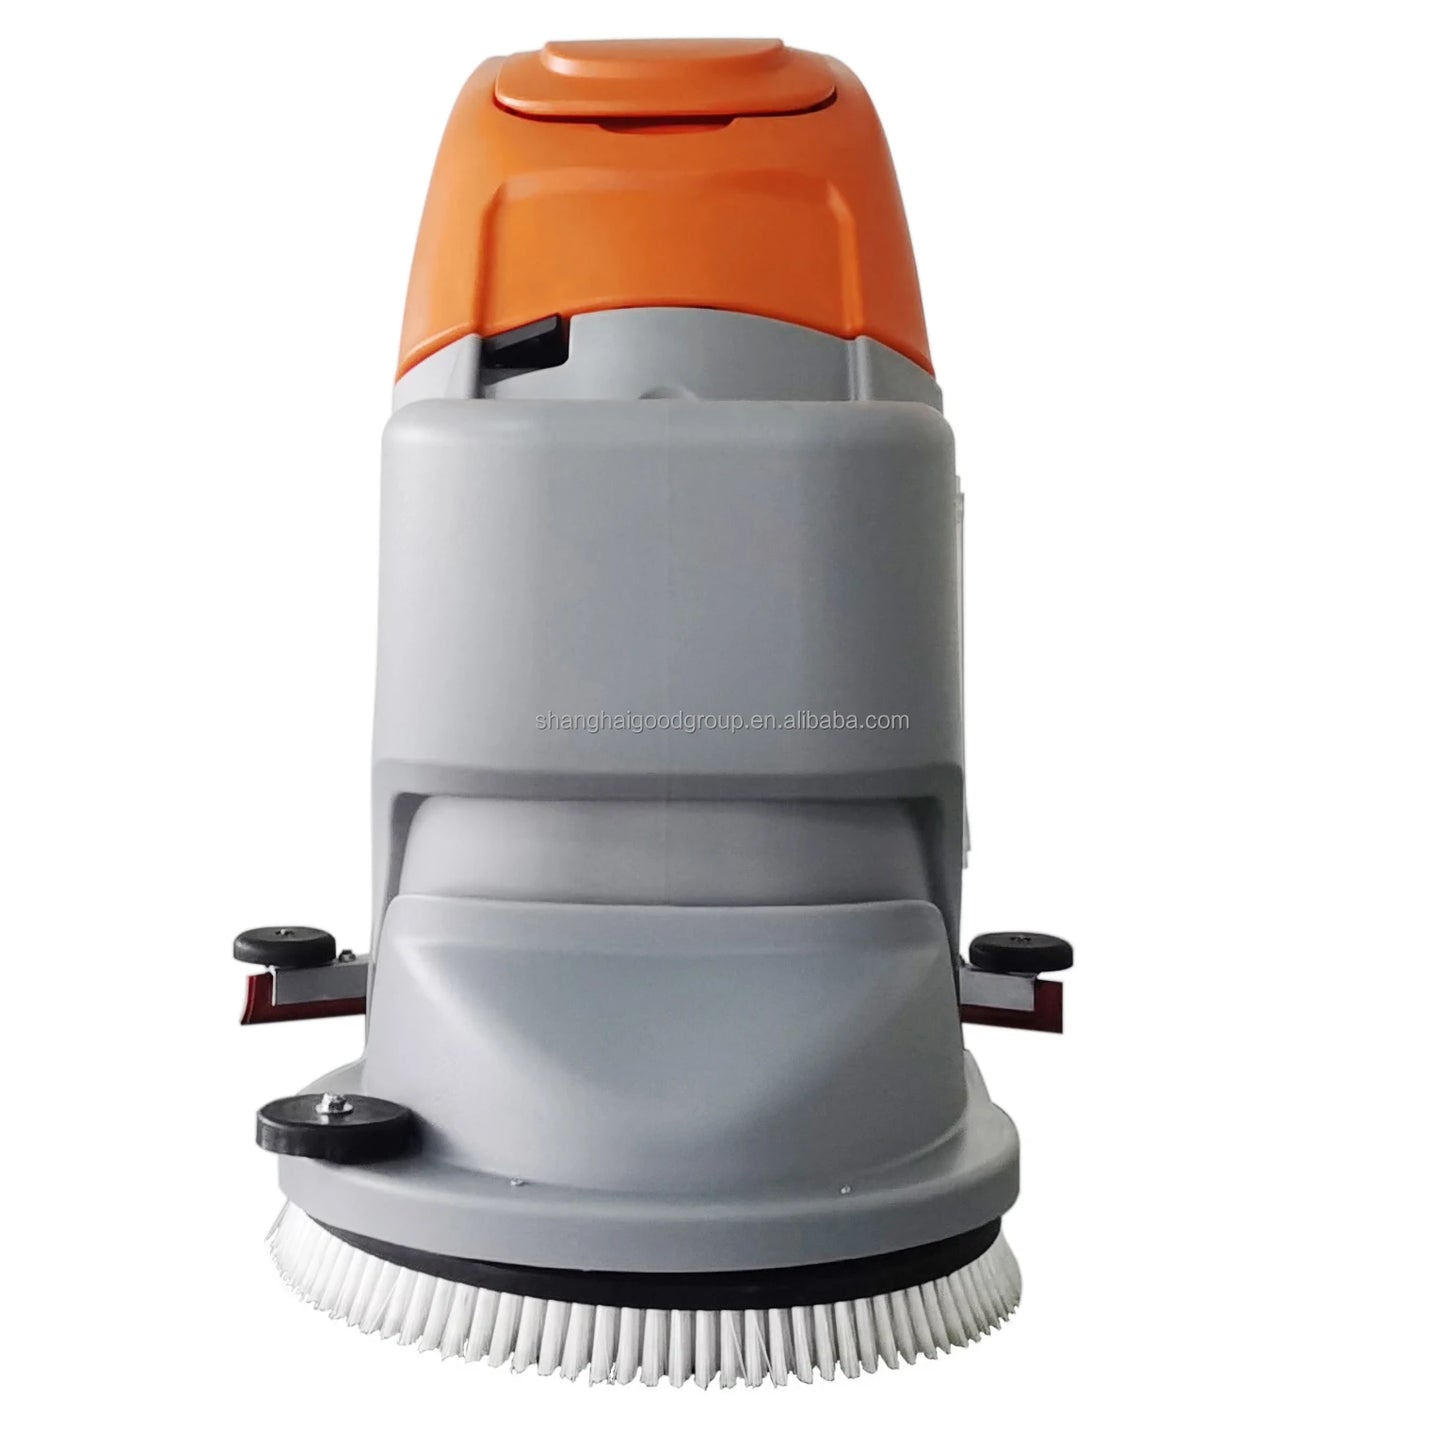 Floor cleaning machine sweeper scrubber equipment with nice scrubber brush